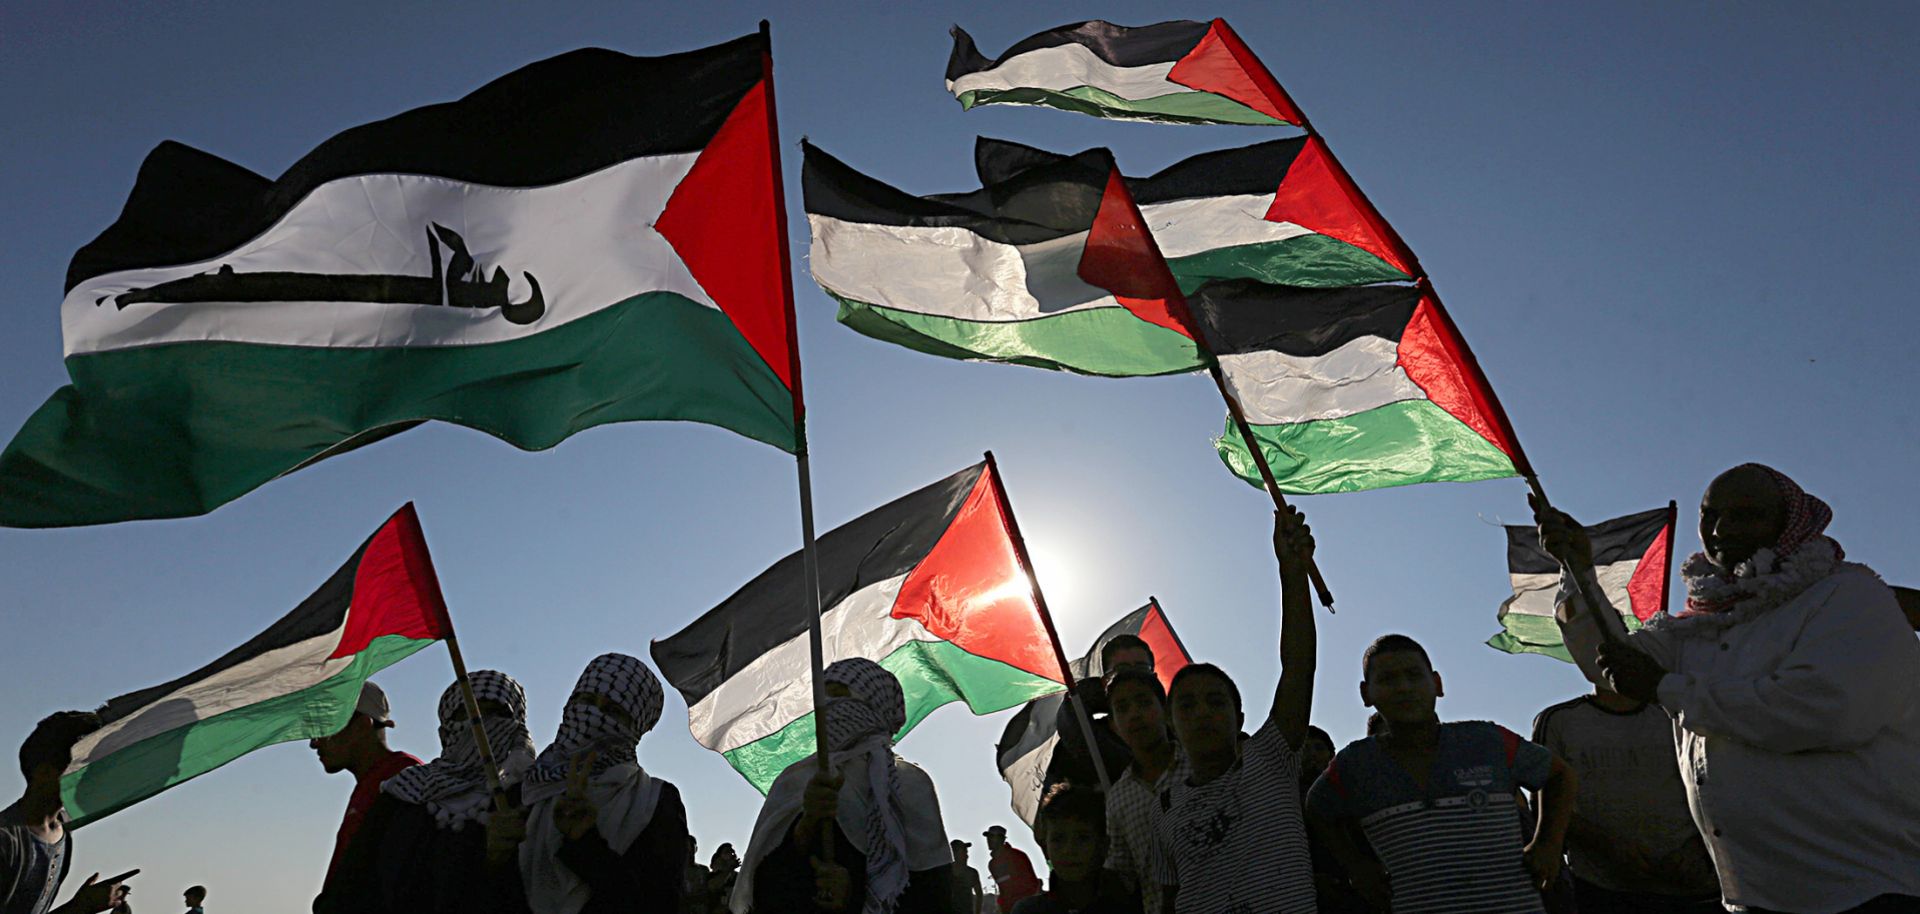 Palestinians gather during a demonstration at the Israel-Gaza border on Oct. 4, 2019.